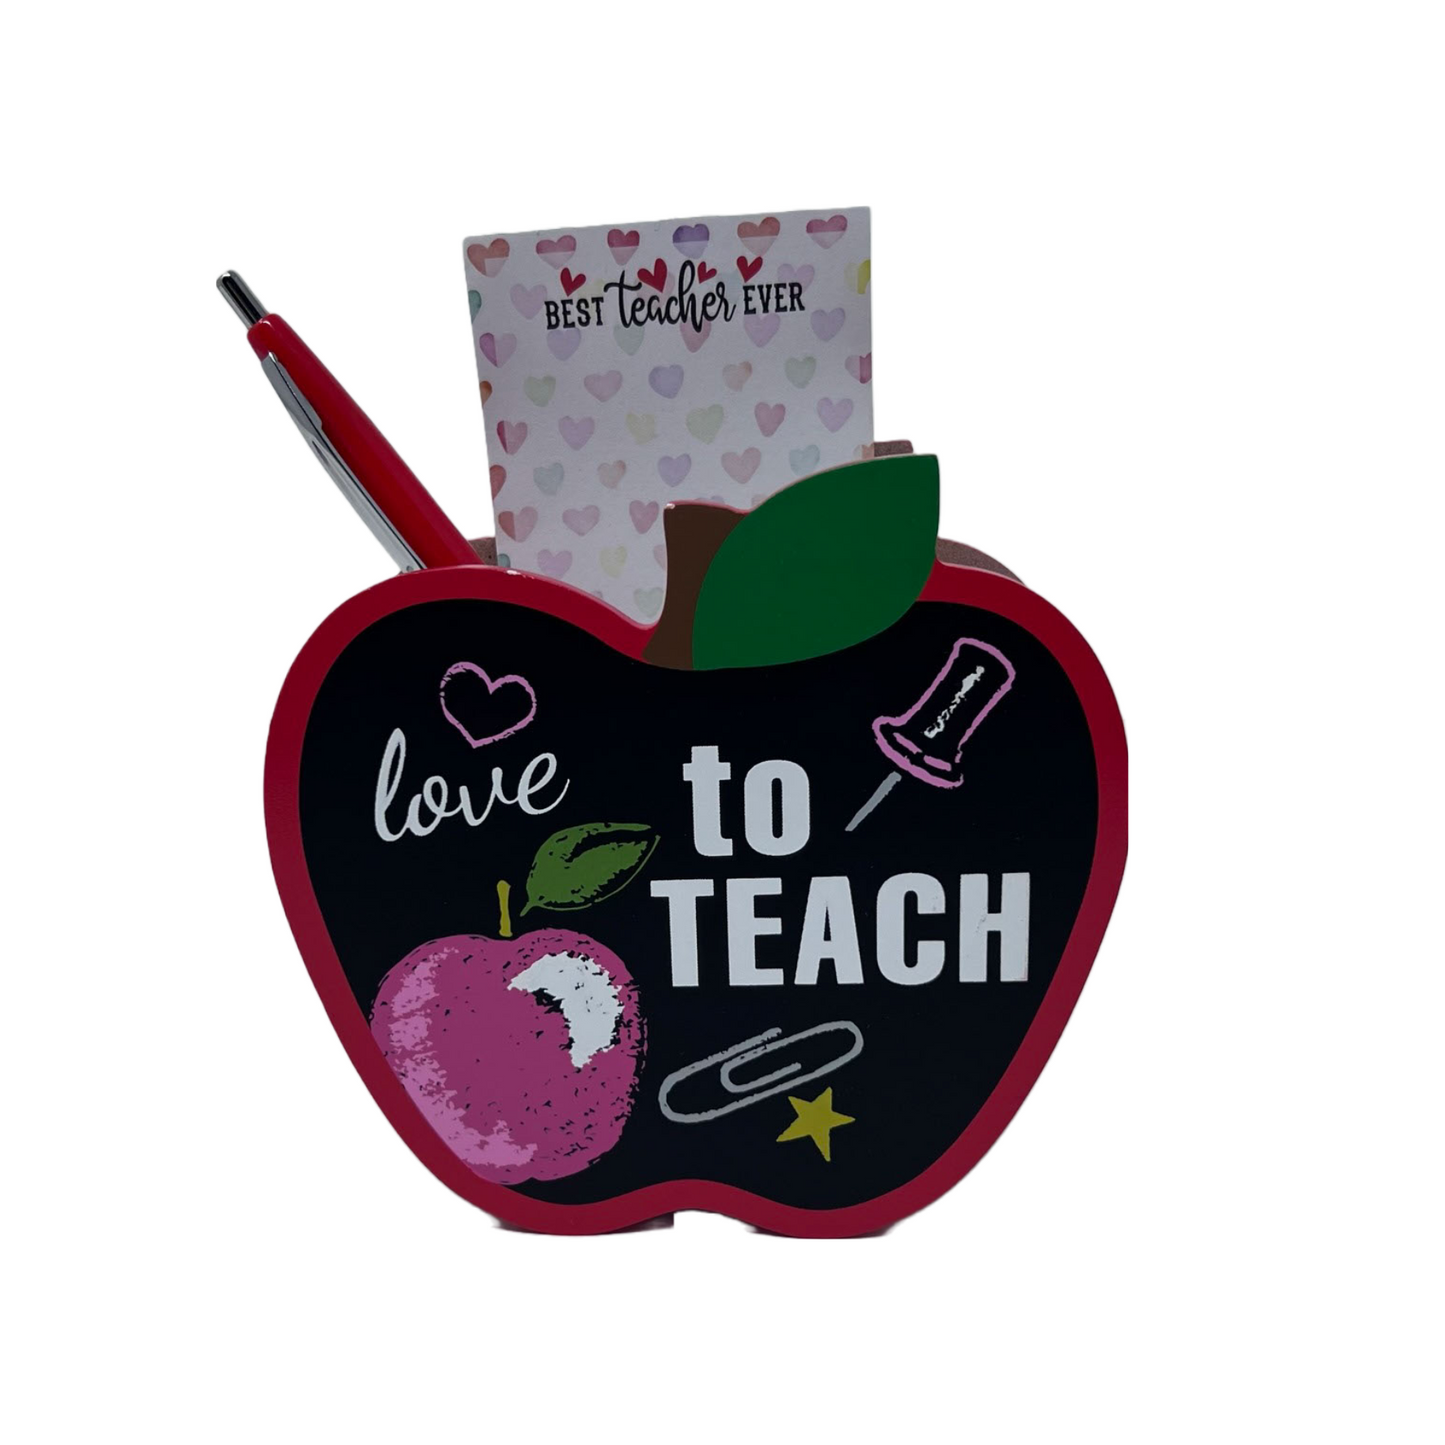 COFFEE, TEACH, REPEAT Water Bottle and Notepad Set